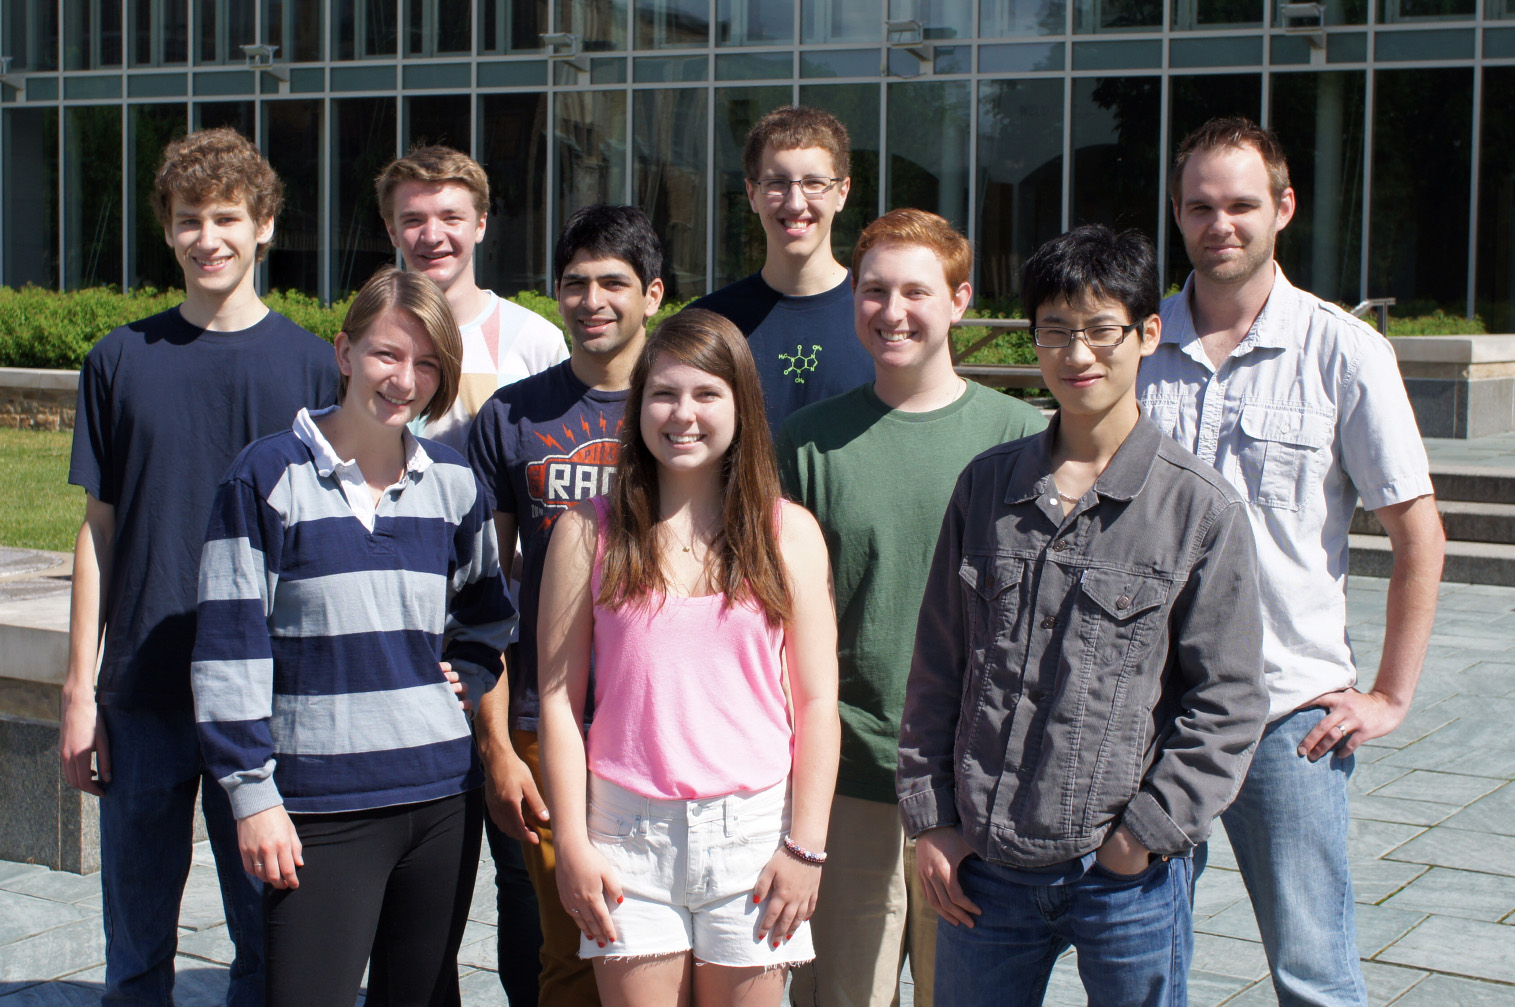 Front: Hannah Ferris, Esther Cleary, Yingbin Mei; middle: Ben Wesley, Alex Kaplan and Professor Max Majireck; back: Ben Schafer, Chris Williams and John Bennett.